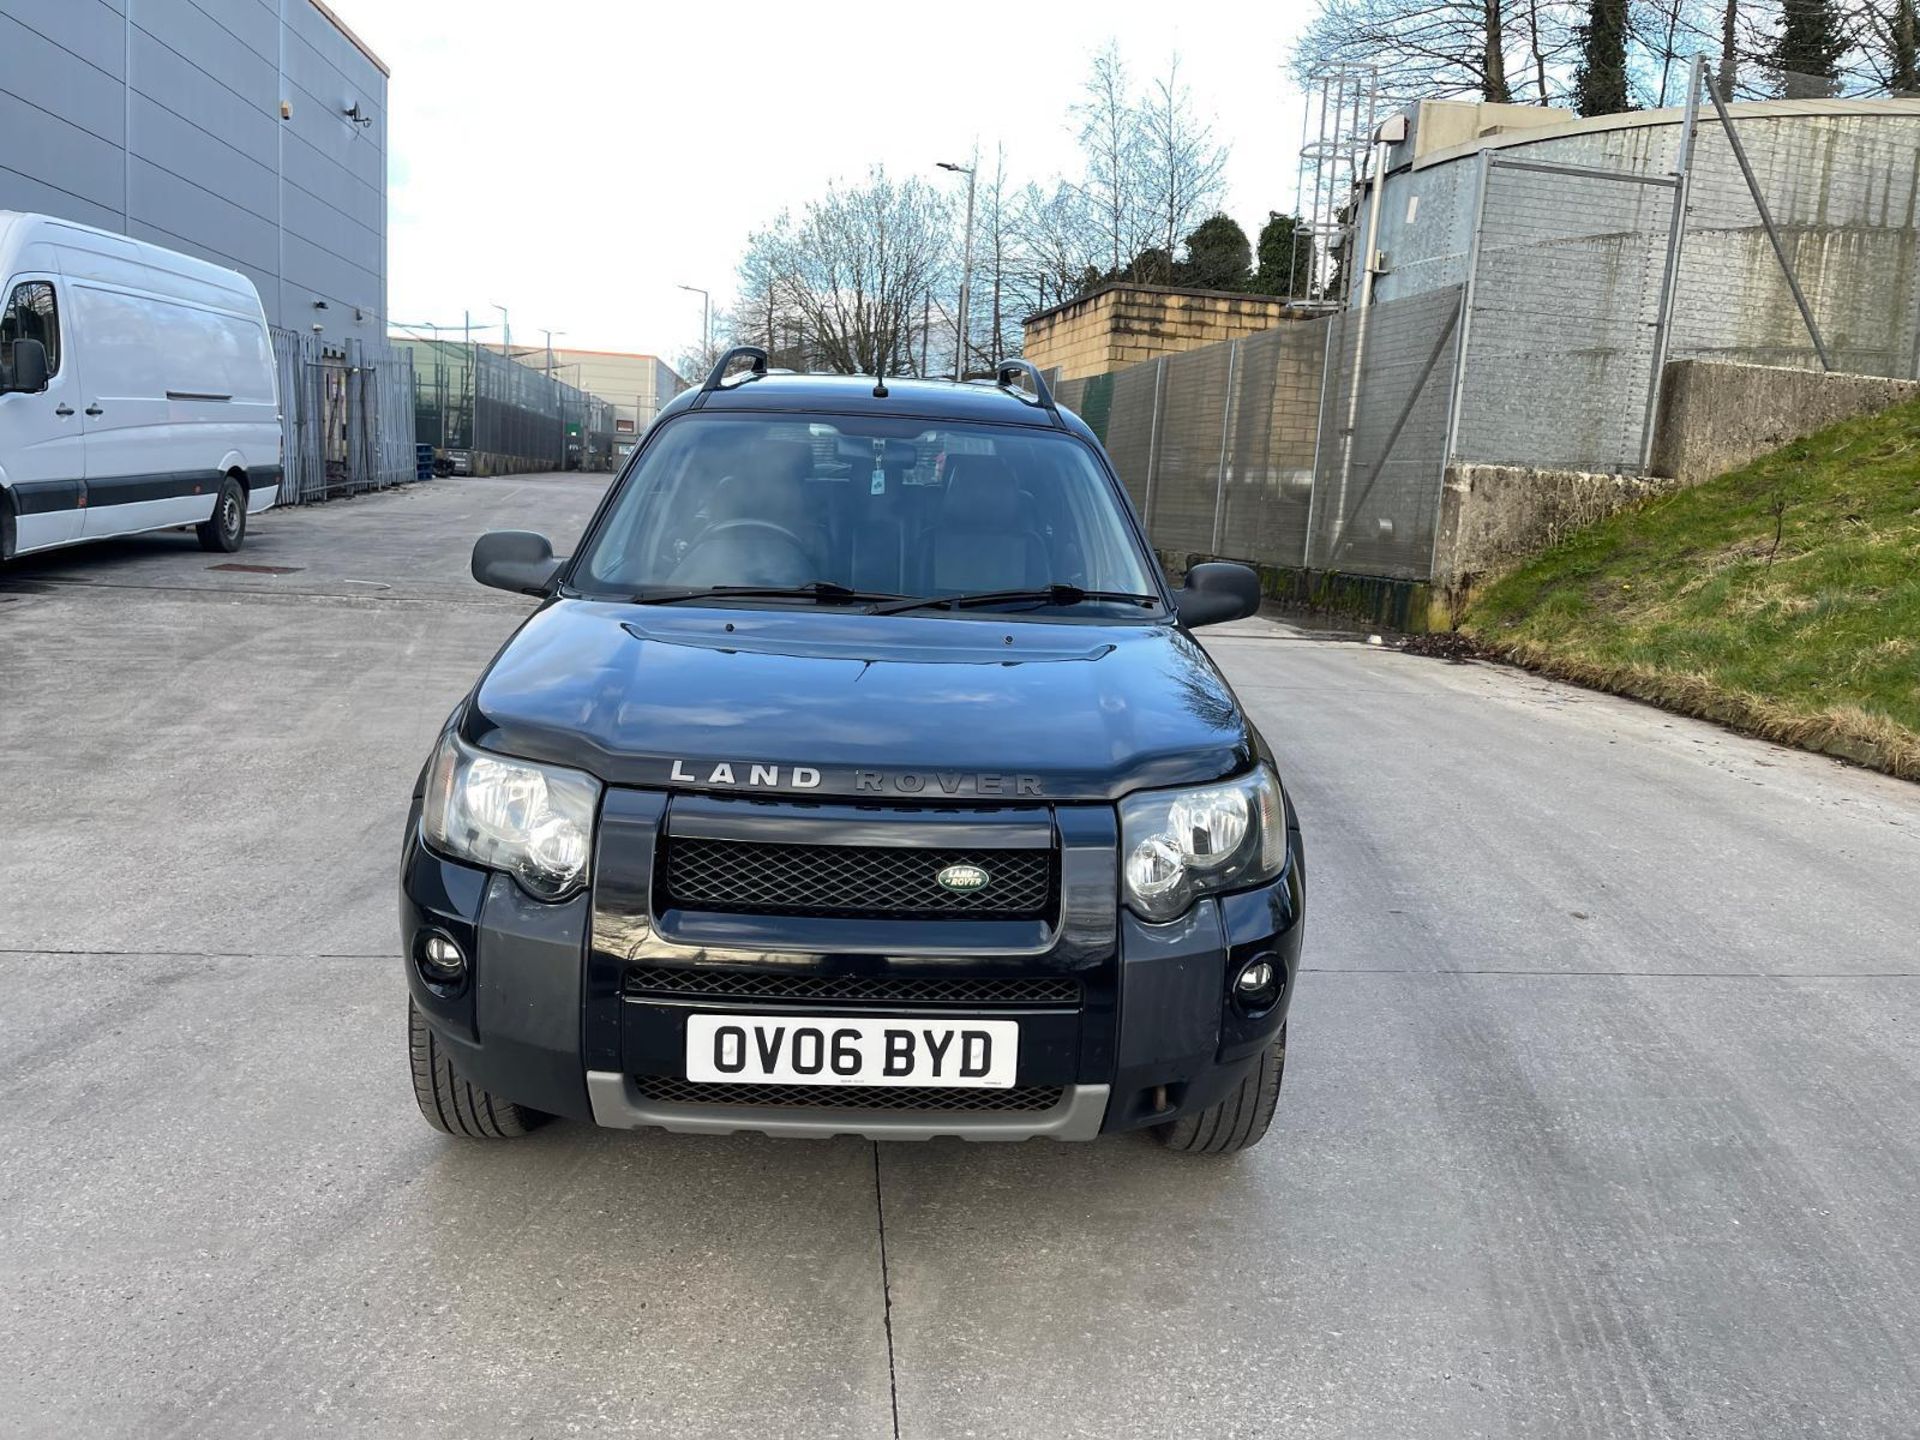 2006 LAND ROVER FREELANDER: DIESEL AUTO WITH LEATHER INTERIOR (NO VAT ON HAMMER) - Image 4 of 12